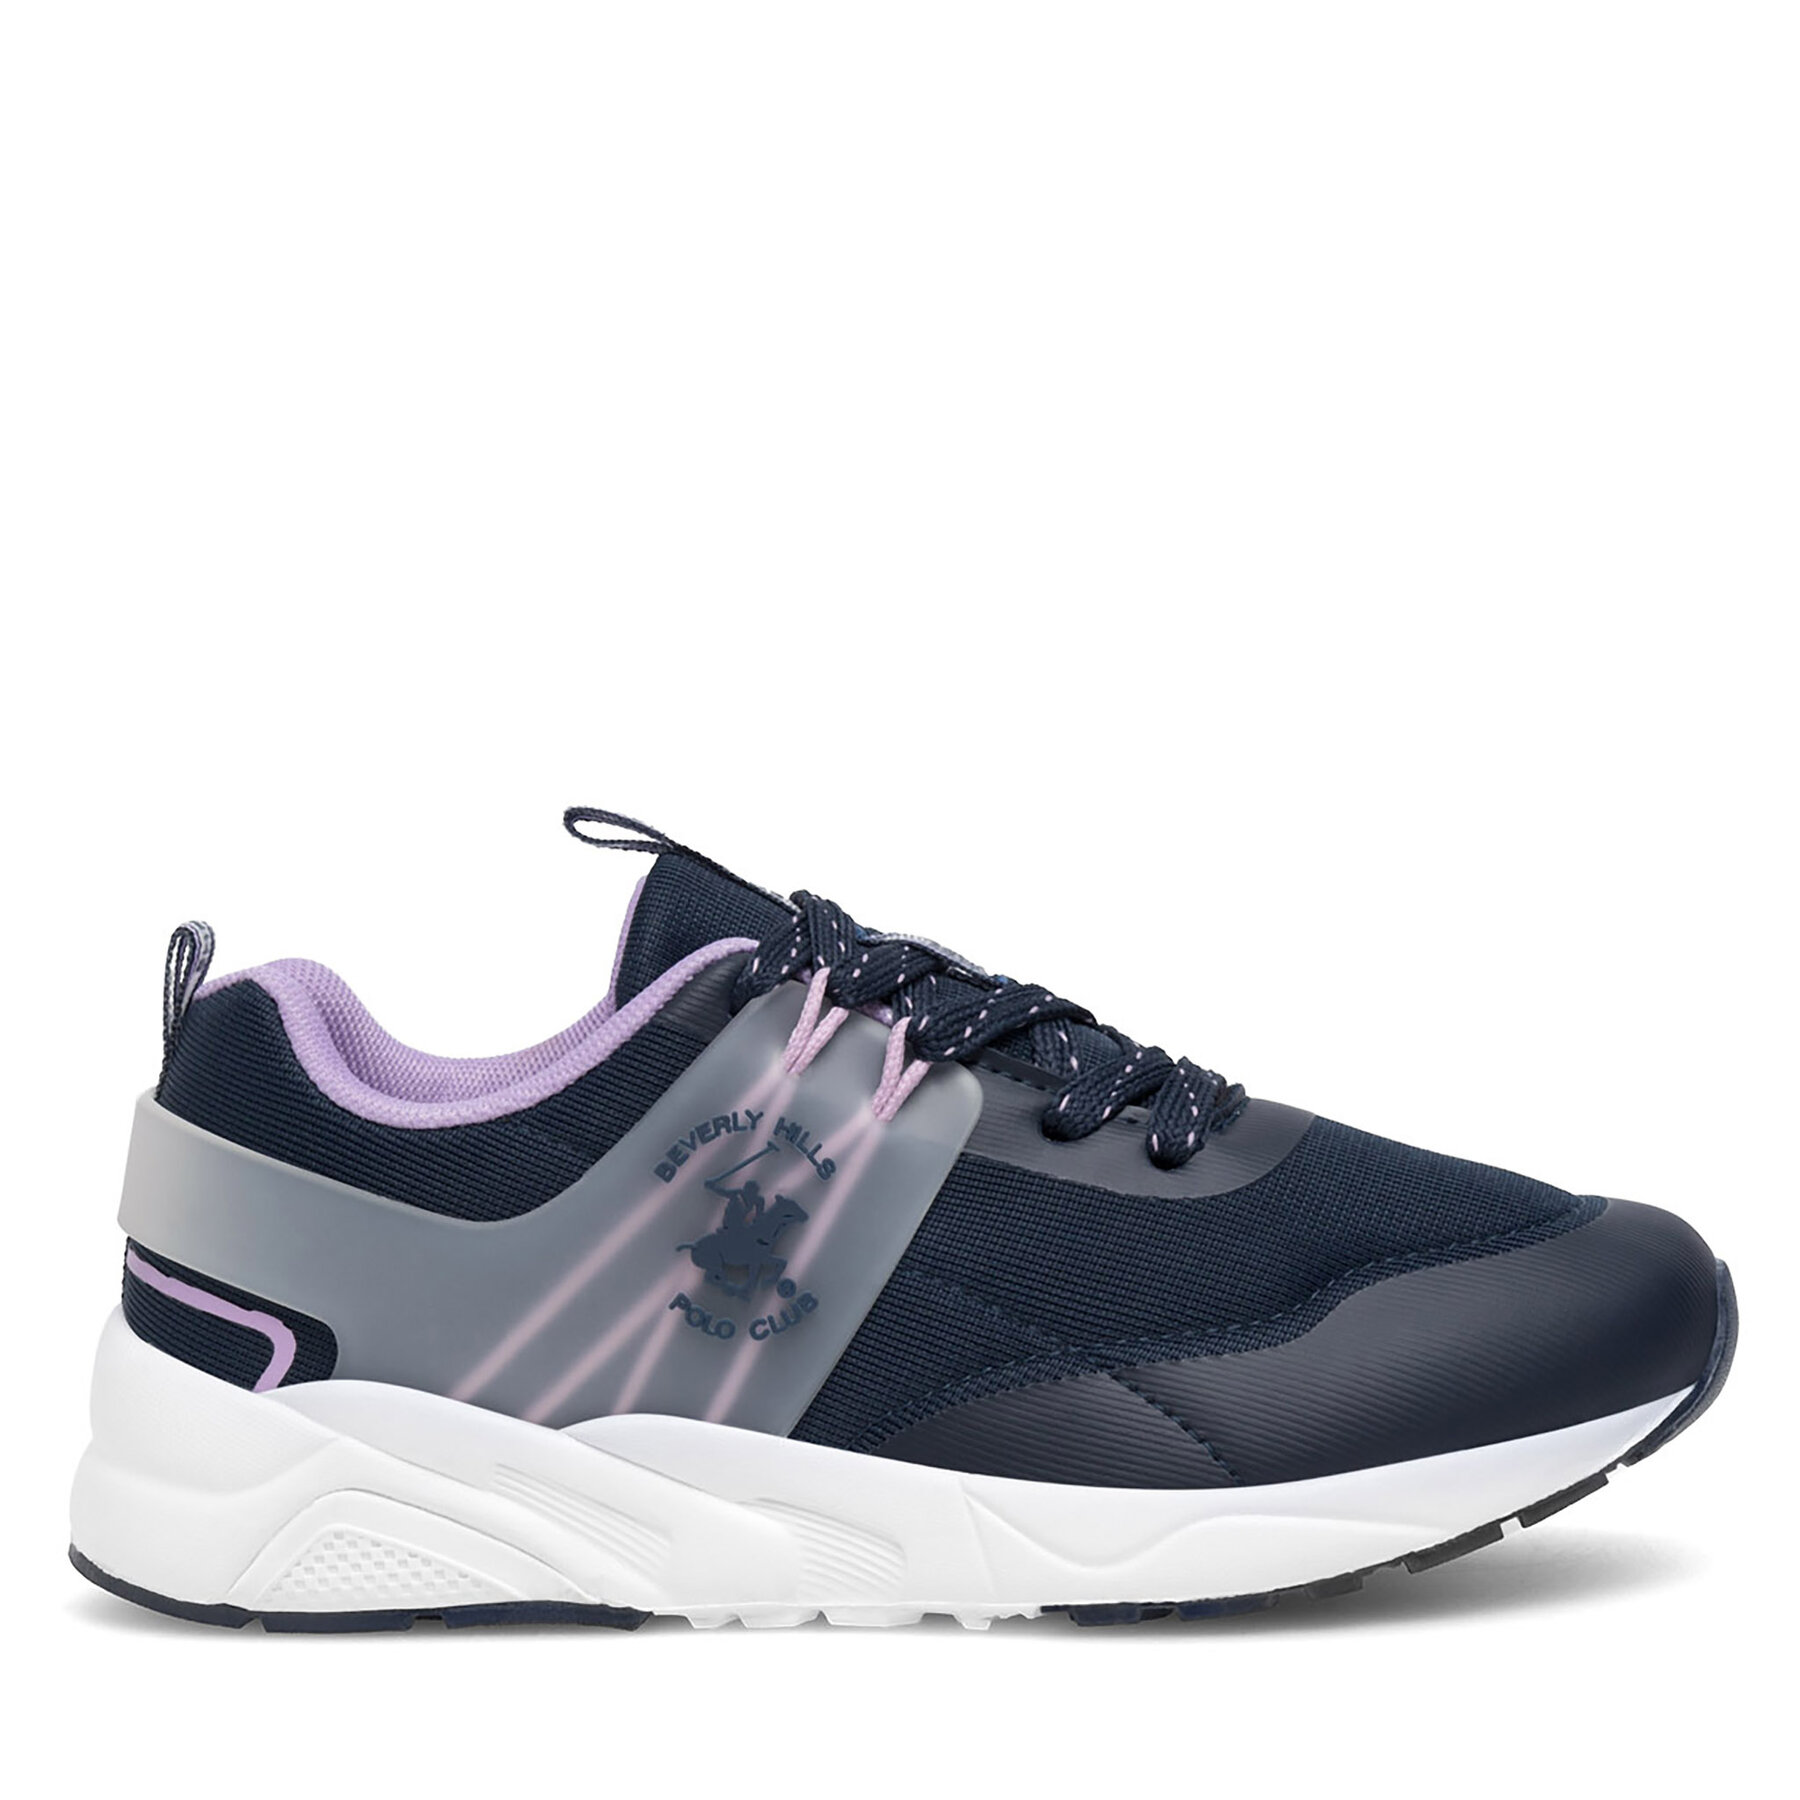 Sneakers Beverly Hills Polo Club CM230807-2(IV)DZ Violett von Beverly Hills Polo Club